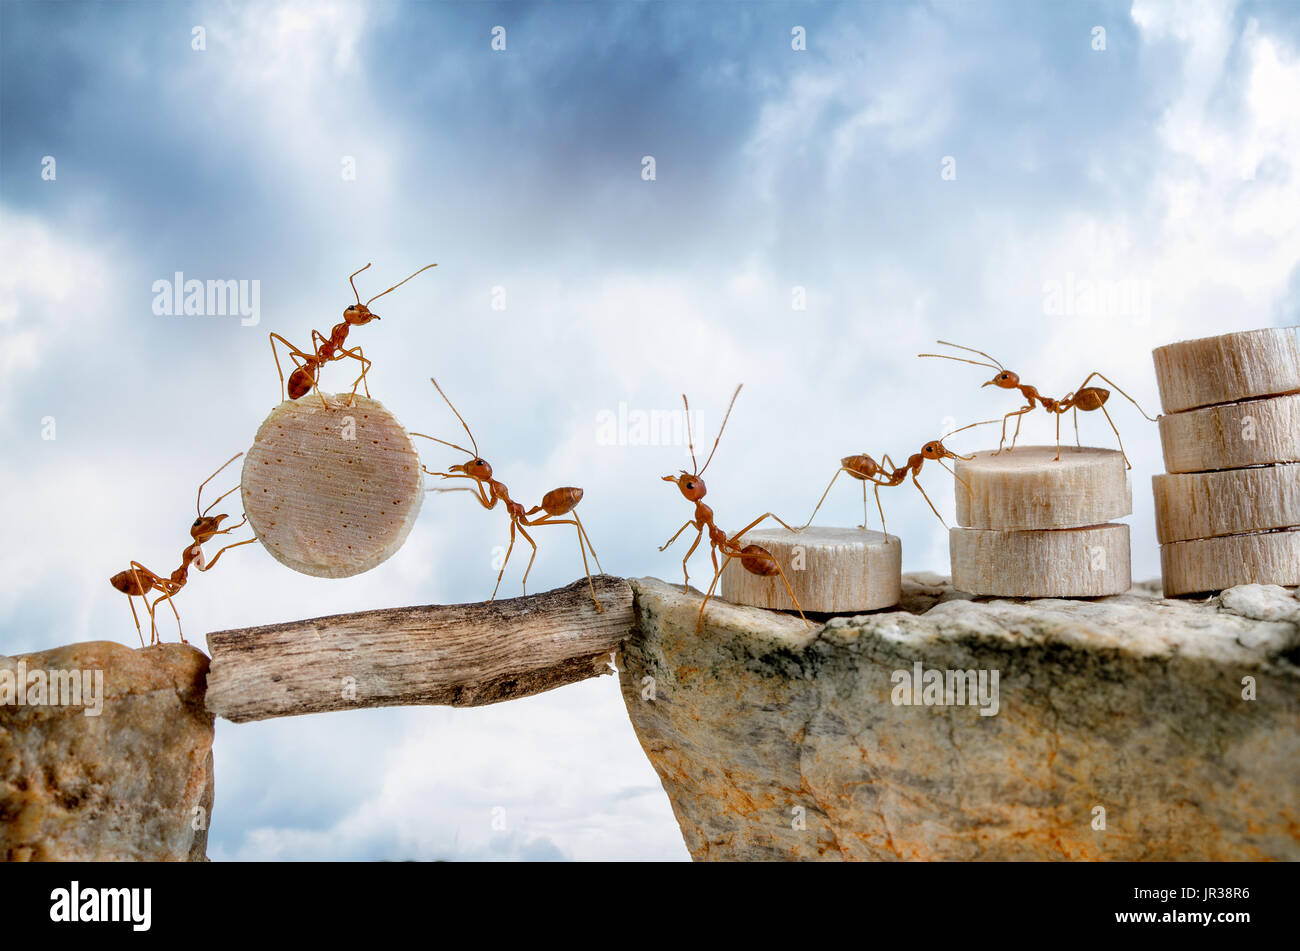 Ants carrying wood crossing cliff, teamwork concept Stock Photo